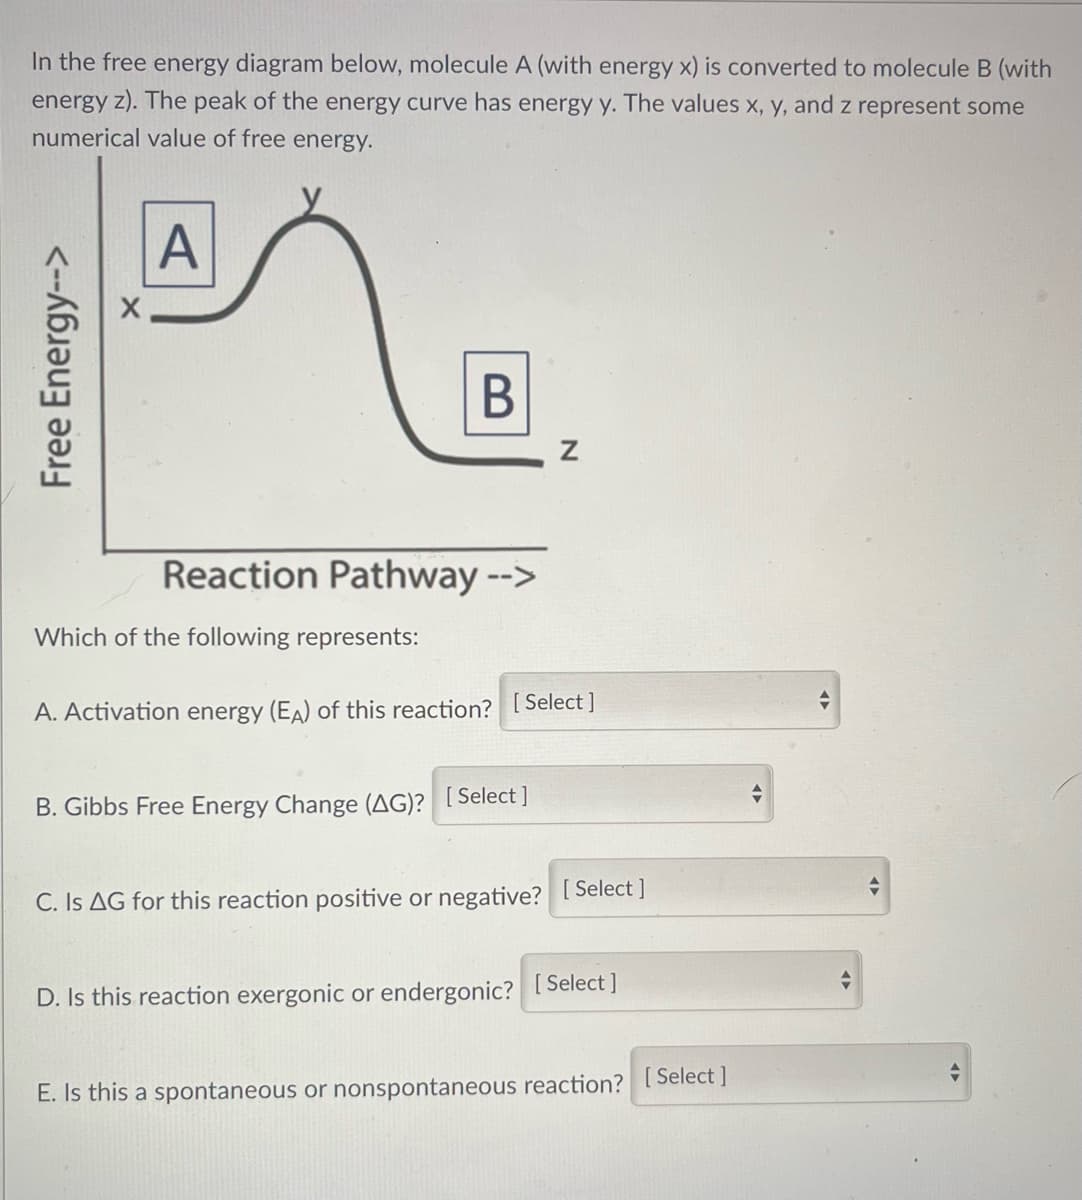 In the free energy diagram below, molecule A (with energy x) is converted to molecule B (with
energy z). The peak of the energy curve has energy y. The values x, y, and z represent some
numerical value of free energy.
Free Energy-->
X
A
B
Reaction Pathway -->
Which of the following represents:
Z
A. Activation energy (EA) of this reaction? [Select]
B. Gibbs Free Energy Change (AG)? [Select]
C. Is AG for this reaction positive or negative? [Select]
D. Is this reaction exergonic or endergonic? [Select]
E. Is this a spontaneous or nonspontaneous reaction? [Select]